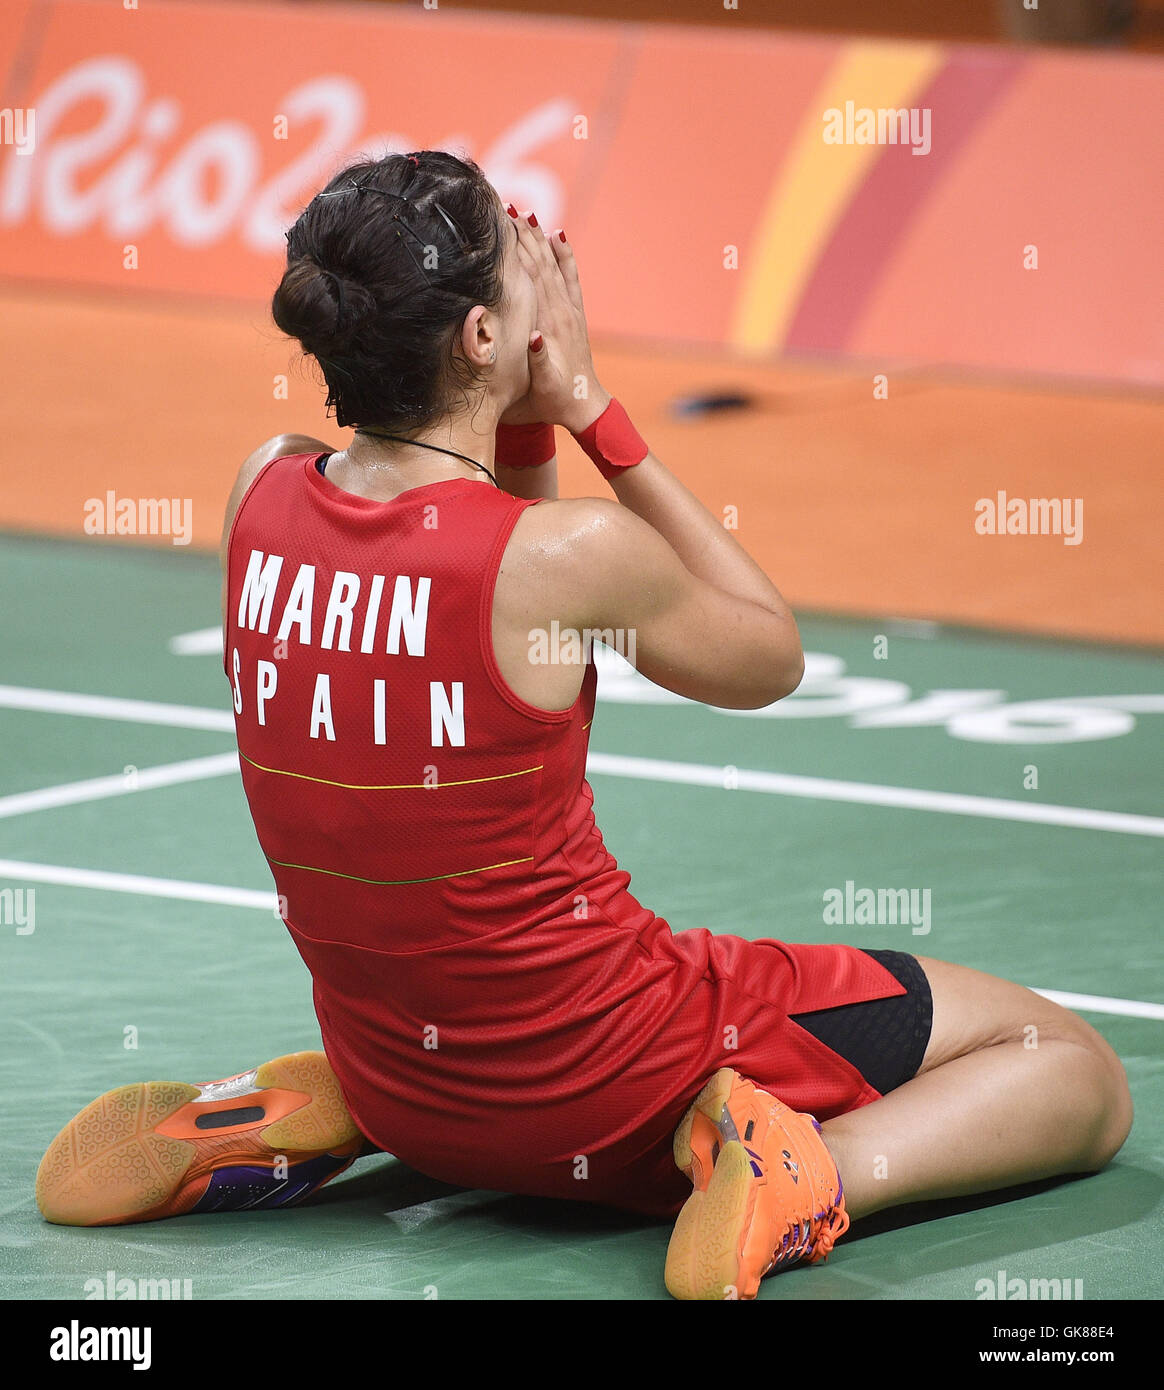 Rio De Janeiro, Brazil. 19th Aug, 2016. Spain's Carolina Marin celebrates after the women's singles badminton gold medal match against India's Pusarla V. Sindhu at the 2016 Rio Olympic Games in Rio de Janeiro, Brazil, on Aug. 19, 2016. Carolina Marin won the gold medal. Credit:  Wang Peng/Xinhua/Alamy Live News Stock Photo